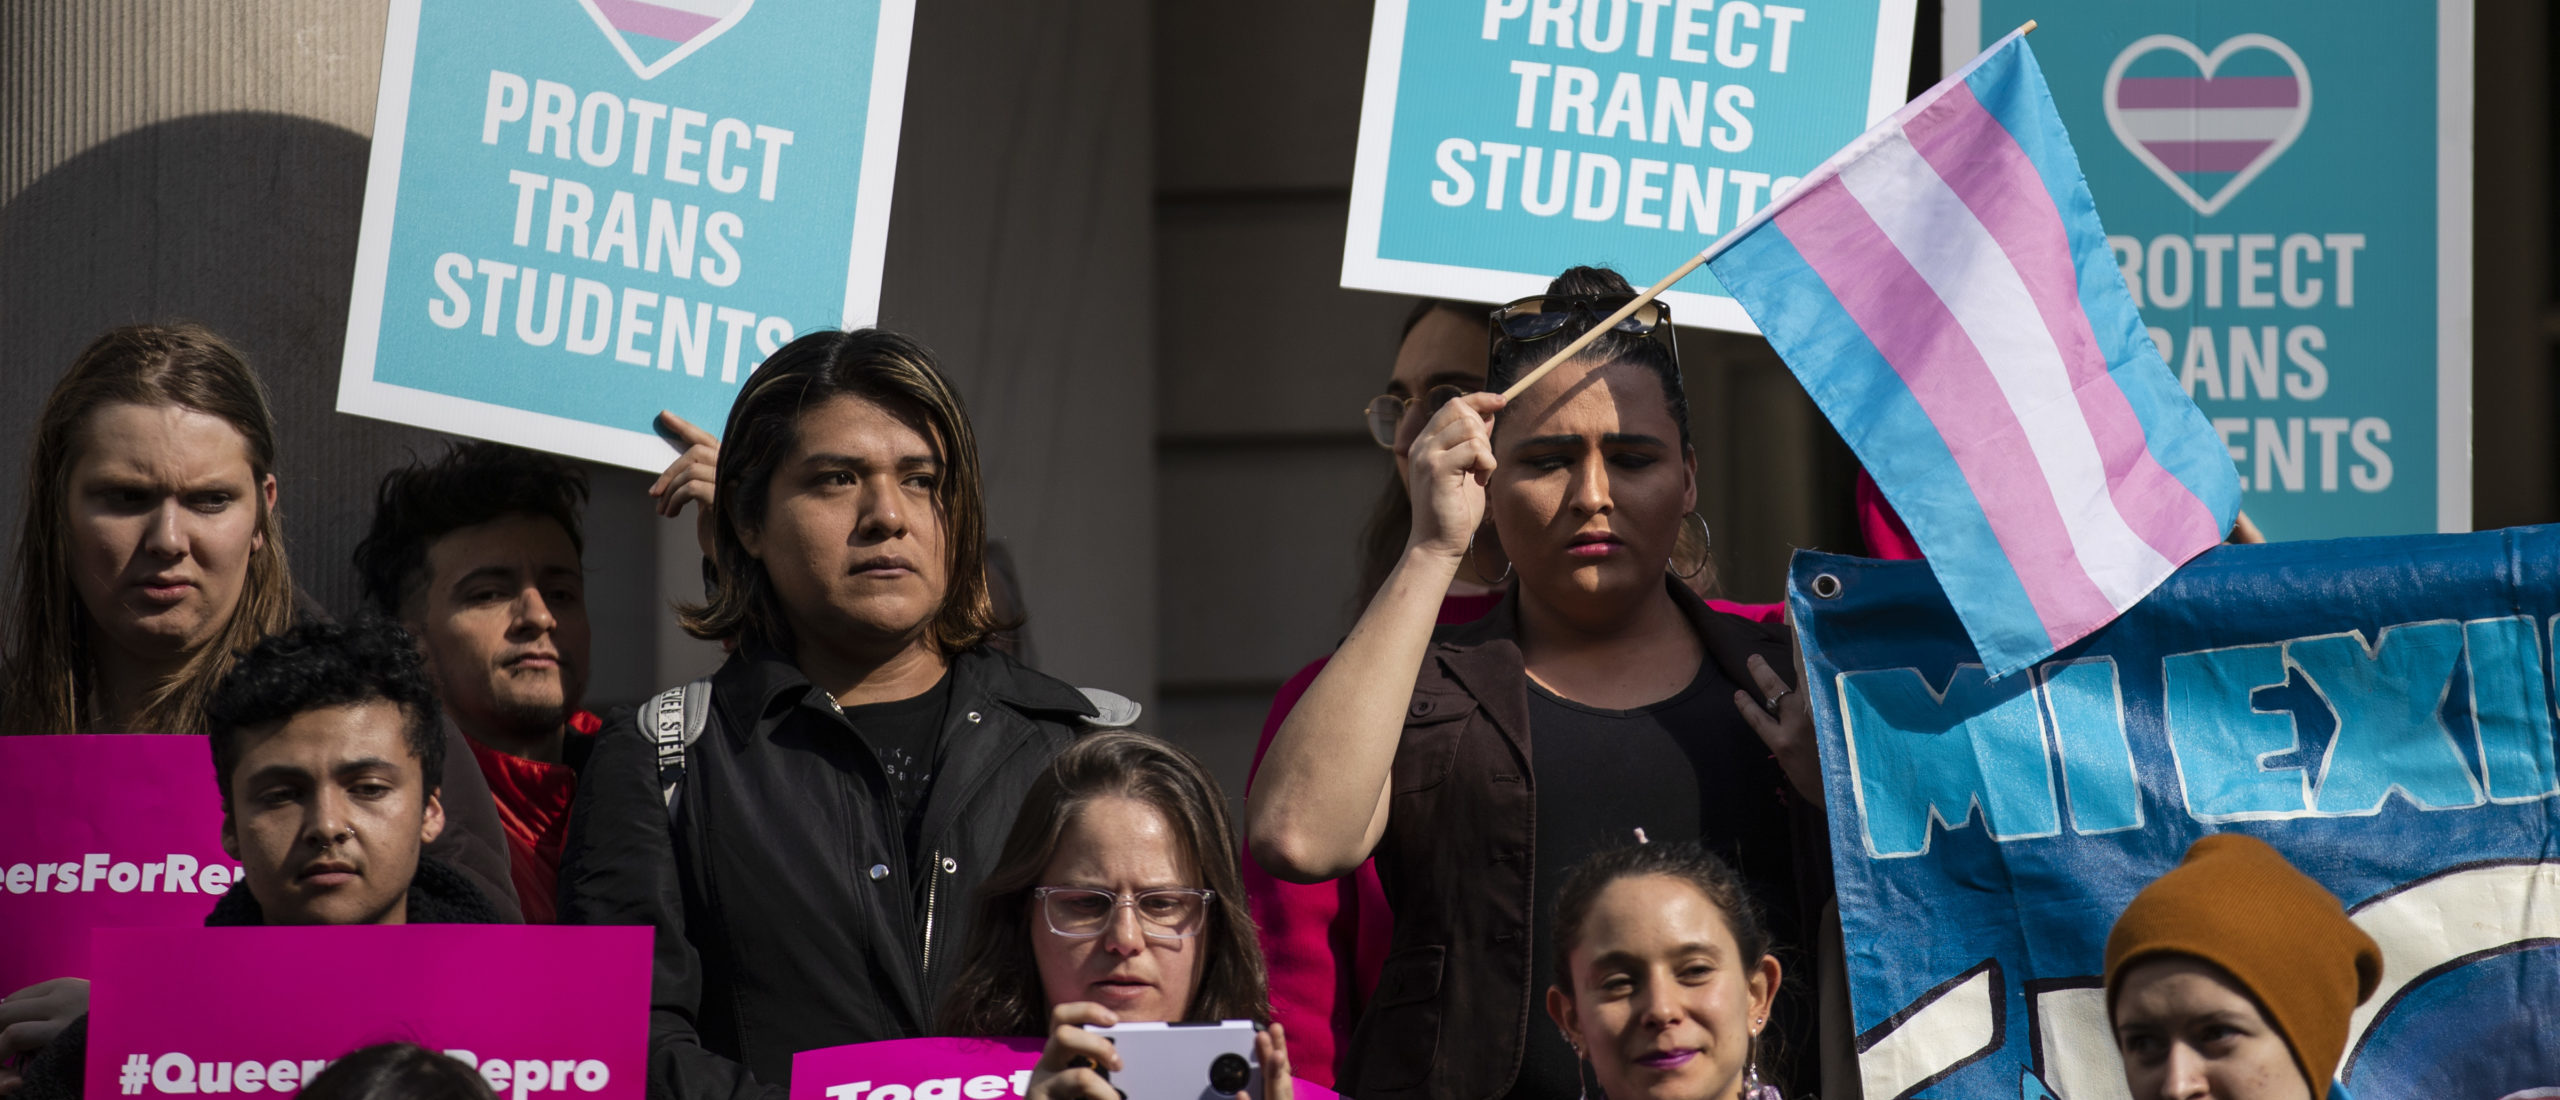 NEW YORK, NY - OCTOBER 24: L.G.B.T. activists and their supporters rally in support of transgender people on the steps of New York City Hall, October 24, 2018 in New York City. The group gathered to speak out against the Trump administration's stance toward transgender people. Last week, The New York Times reported on an unreleased administration memo that proposes a strict biological definition of gender based on a person's genitalia at birth. (Photo by Drew Angerer/Getty Images)